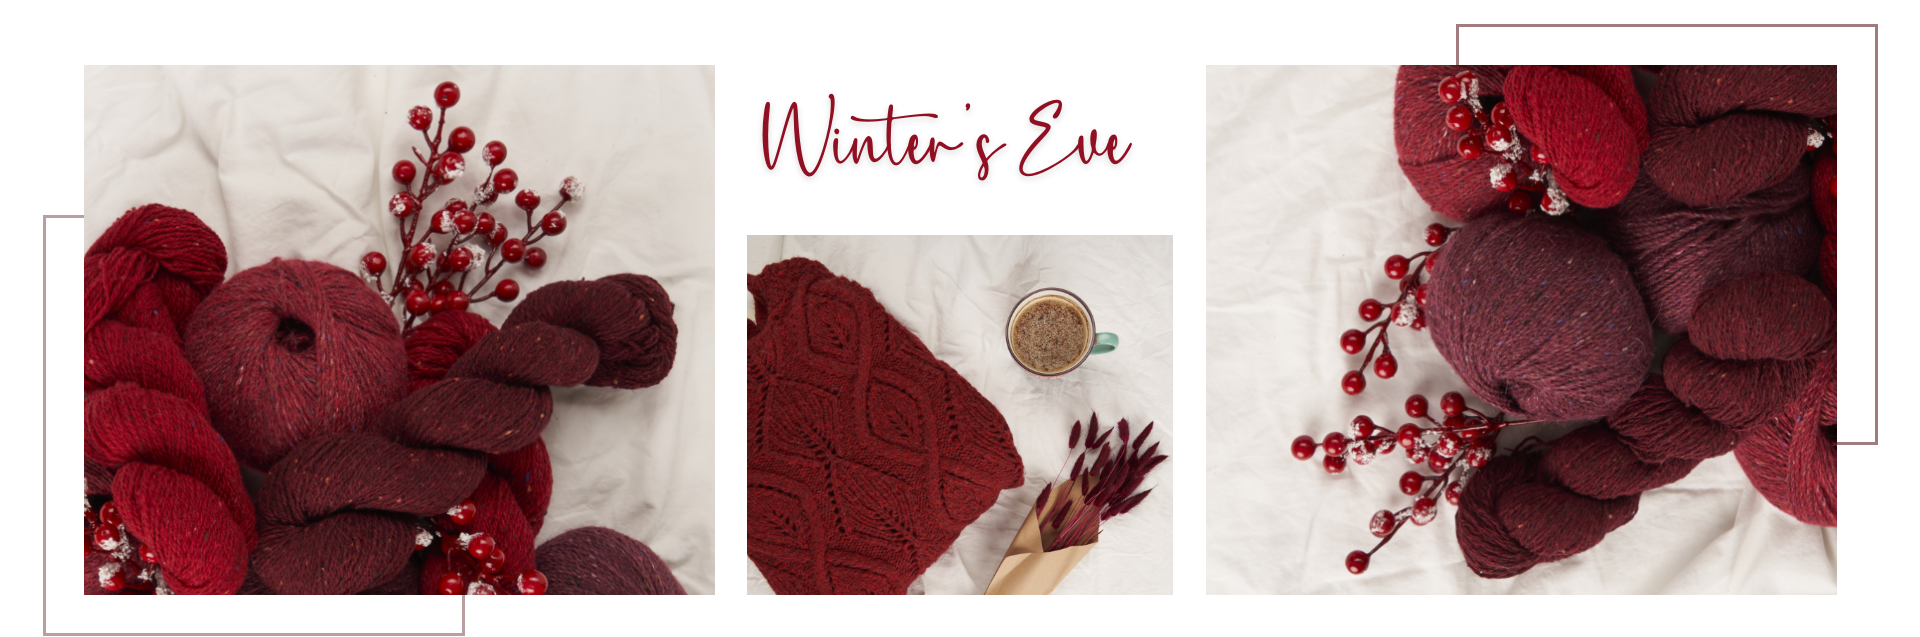 Winters eve banner